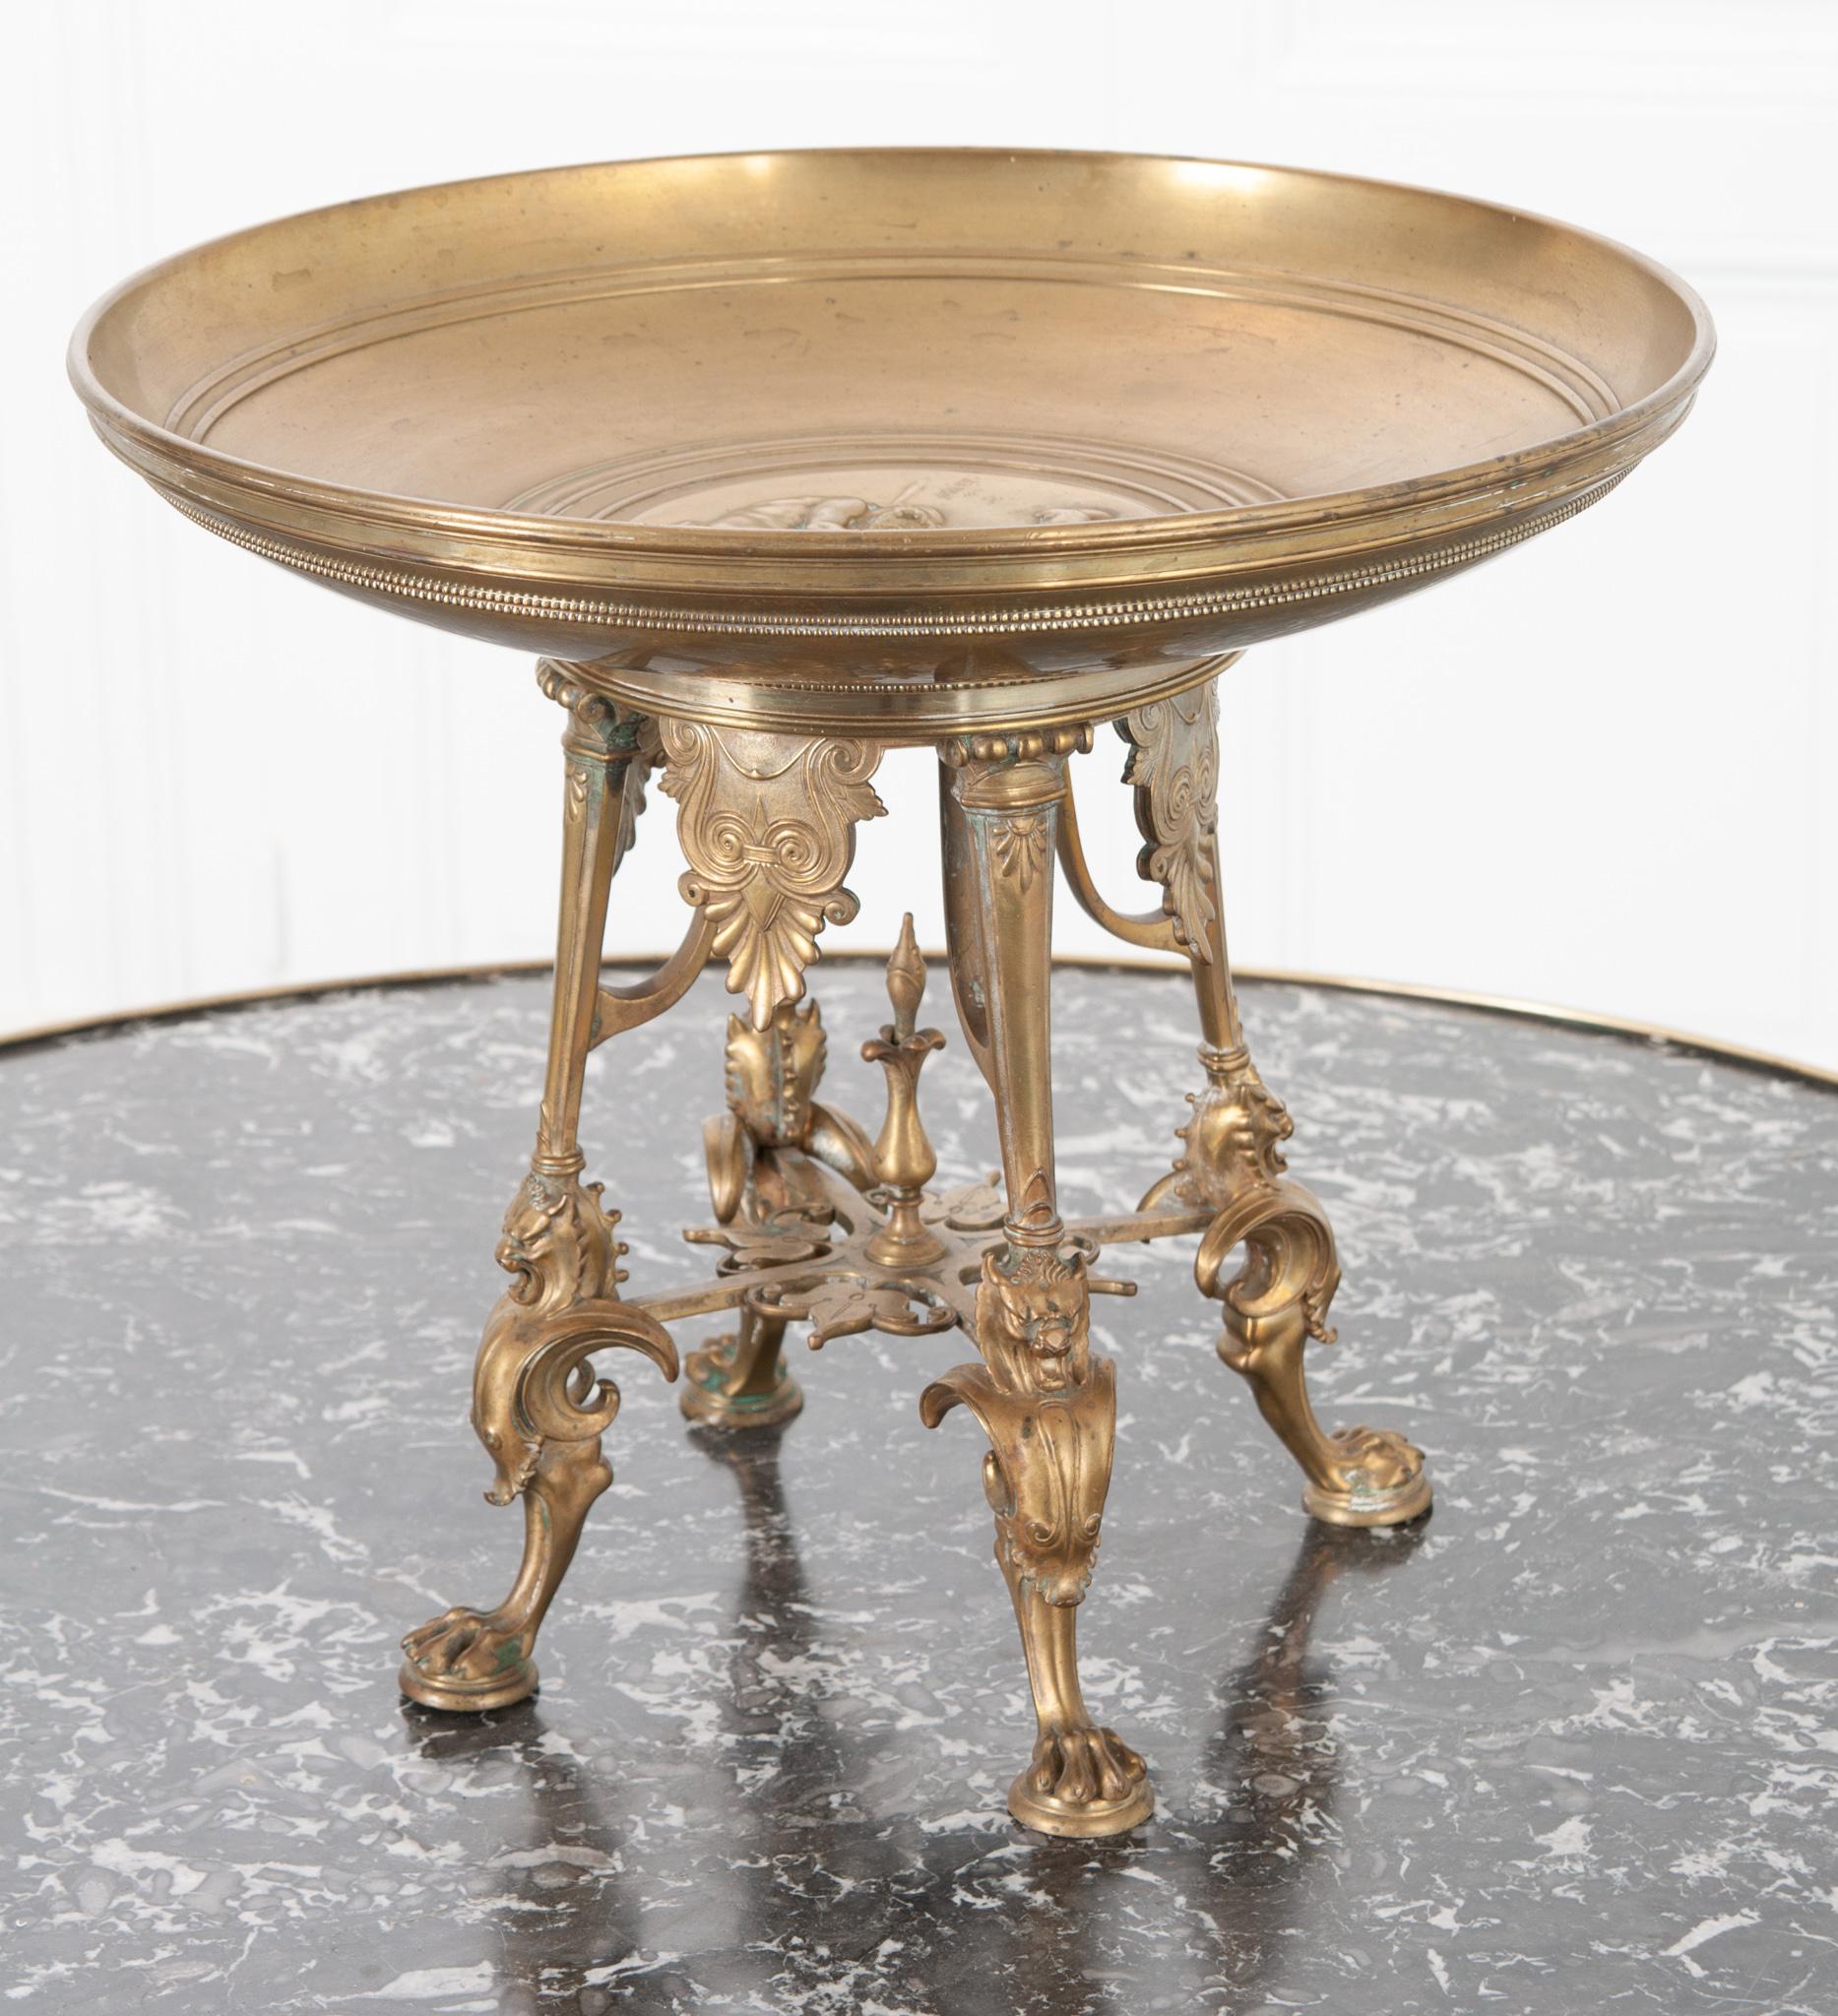 This unique and large solid bronze bowl is from 19th century France. Tazza bowls were once a common feature of dining sets, used as a decorative serving dish. An intricate motif of the Greek legend of Pandora graces the center of the bowl and has a